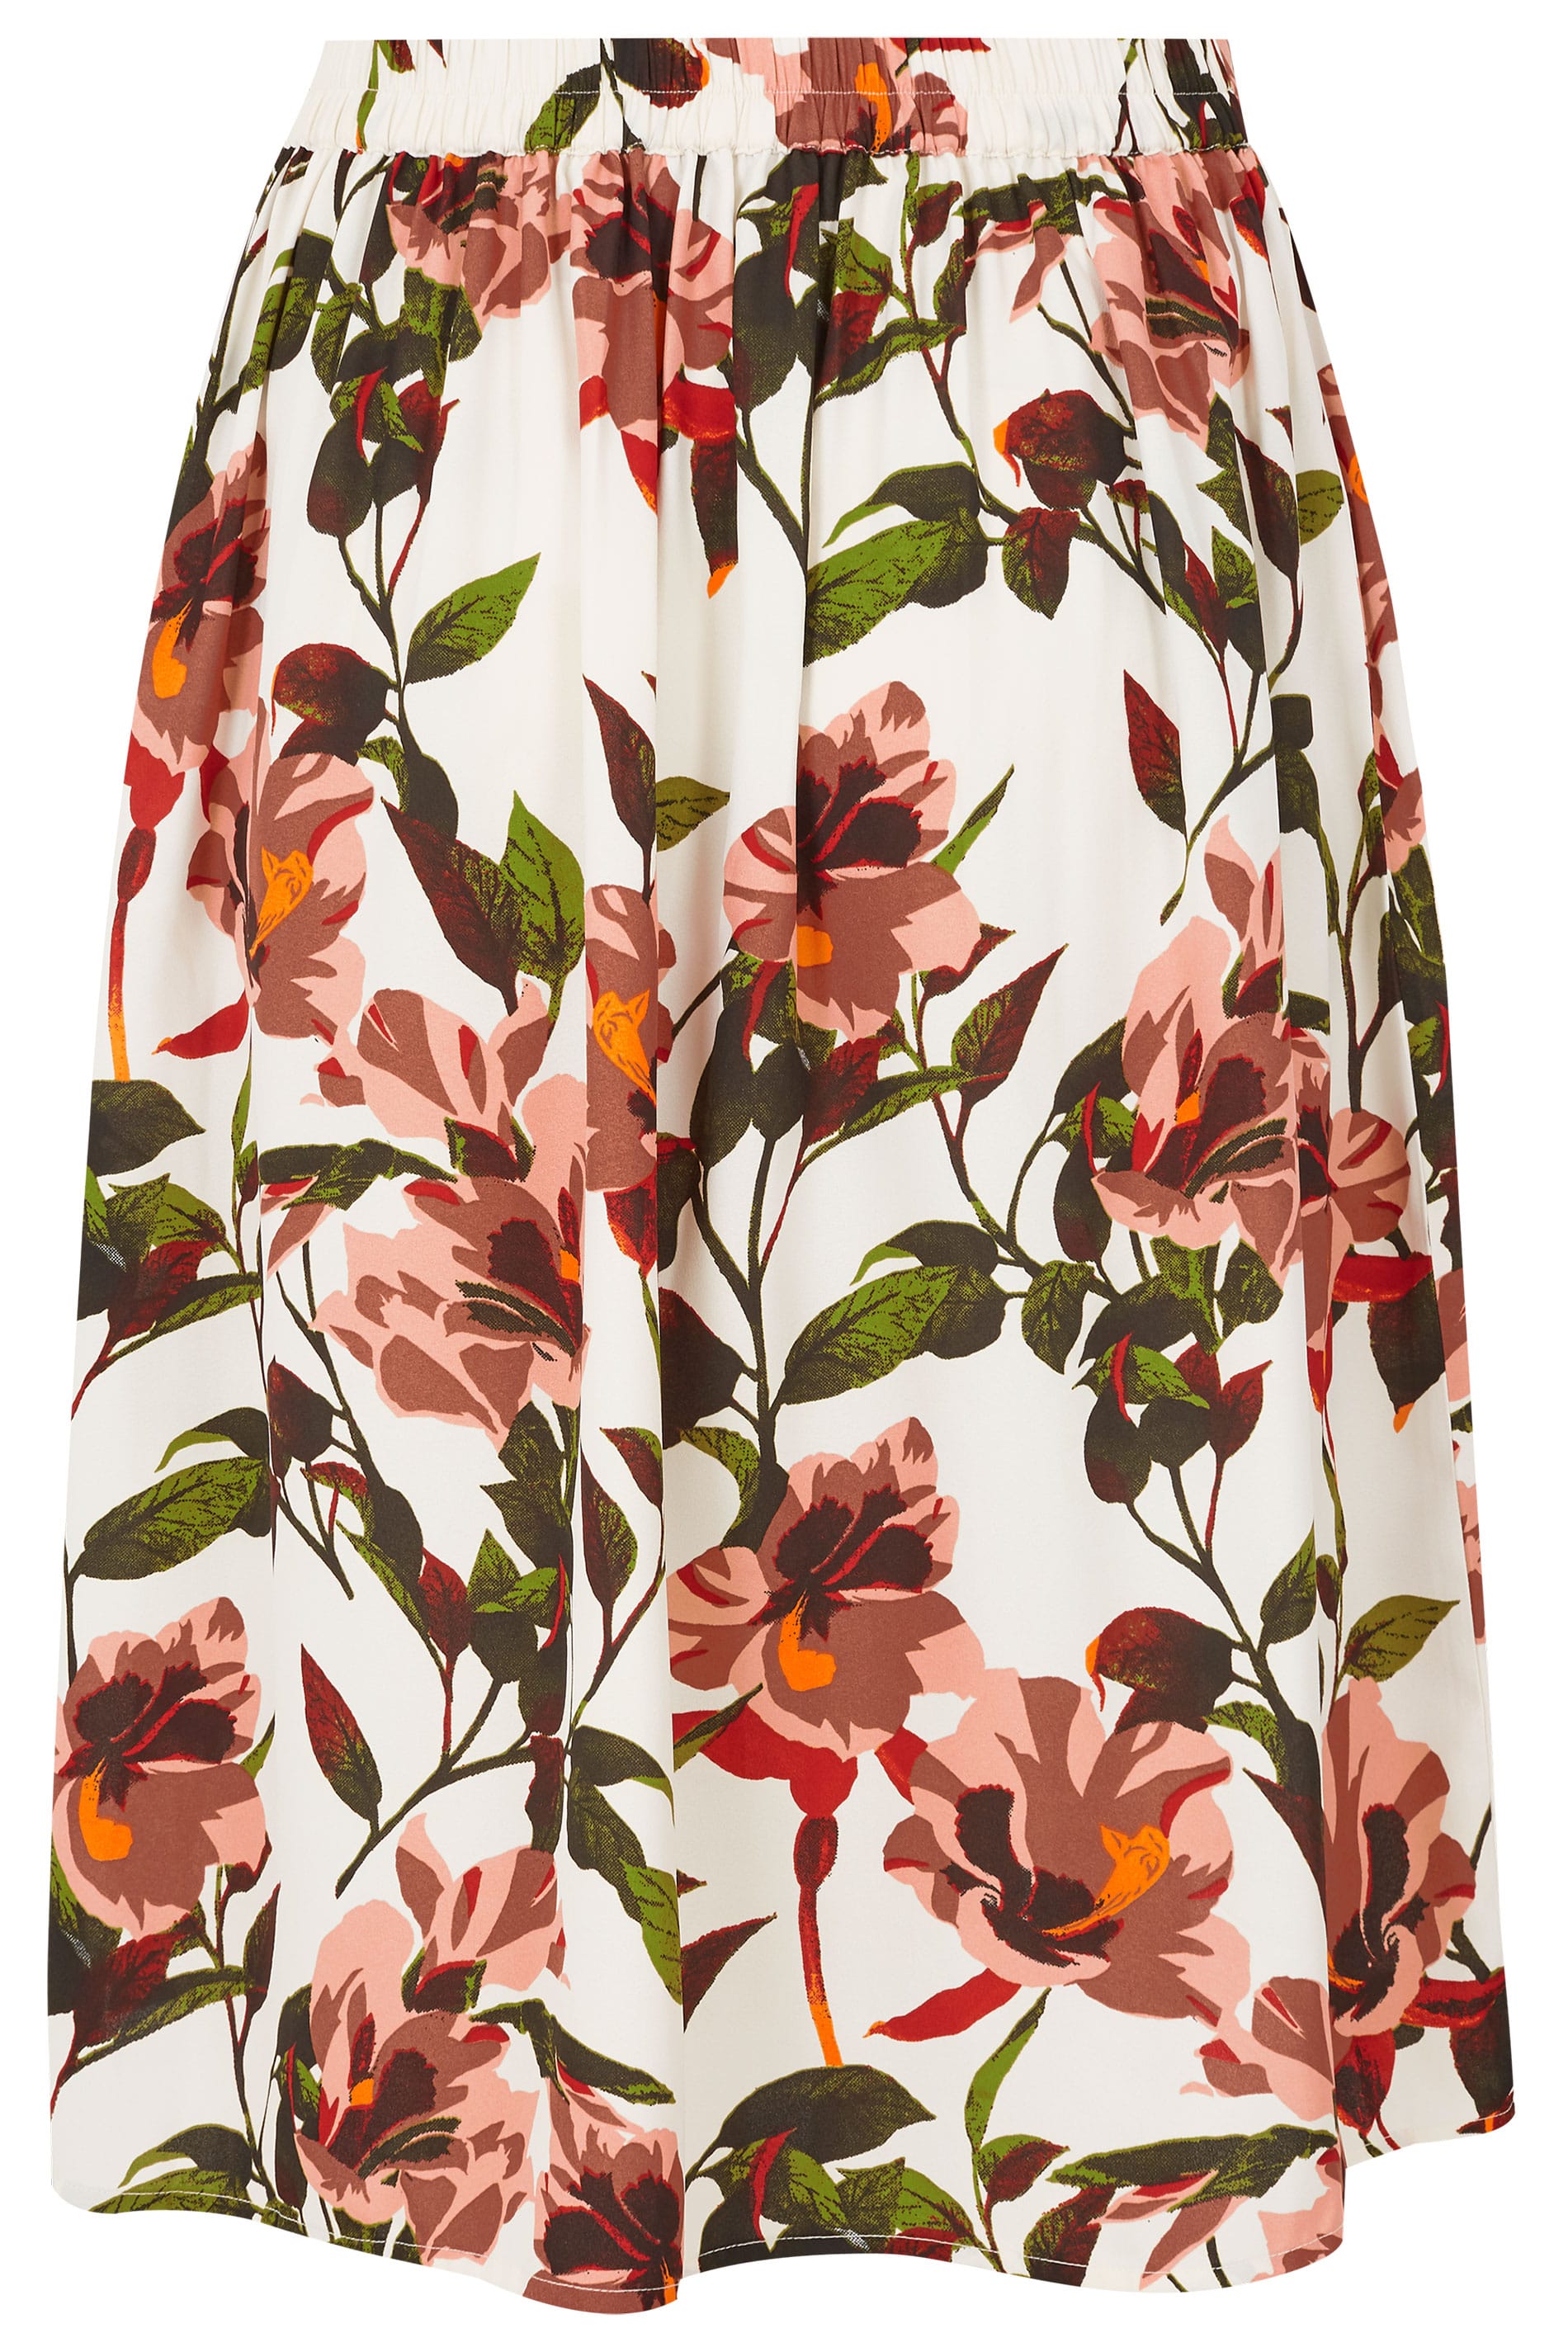 YOURS LONDON White Floral Midi Skirt, Plus size 16 to 32